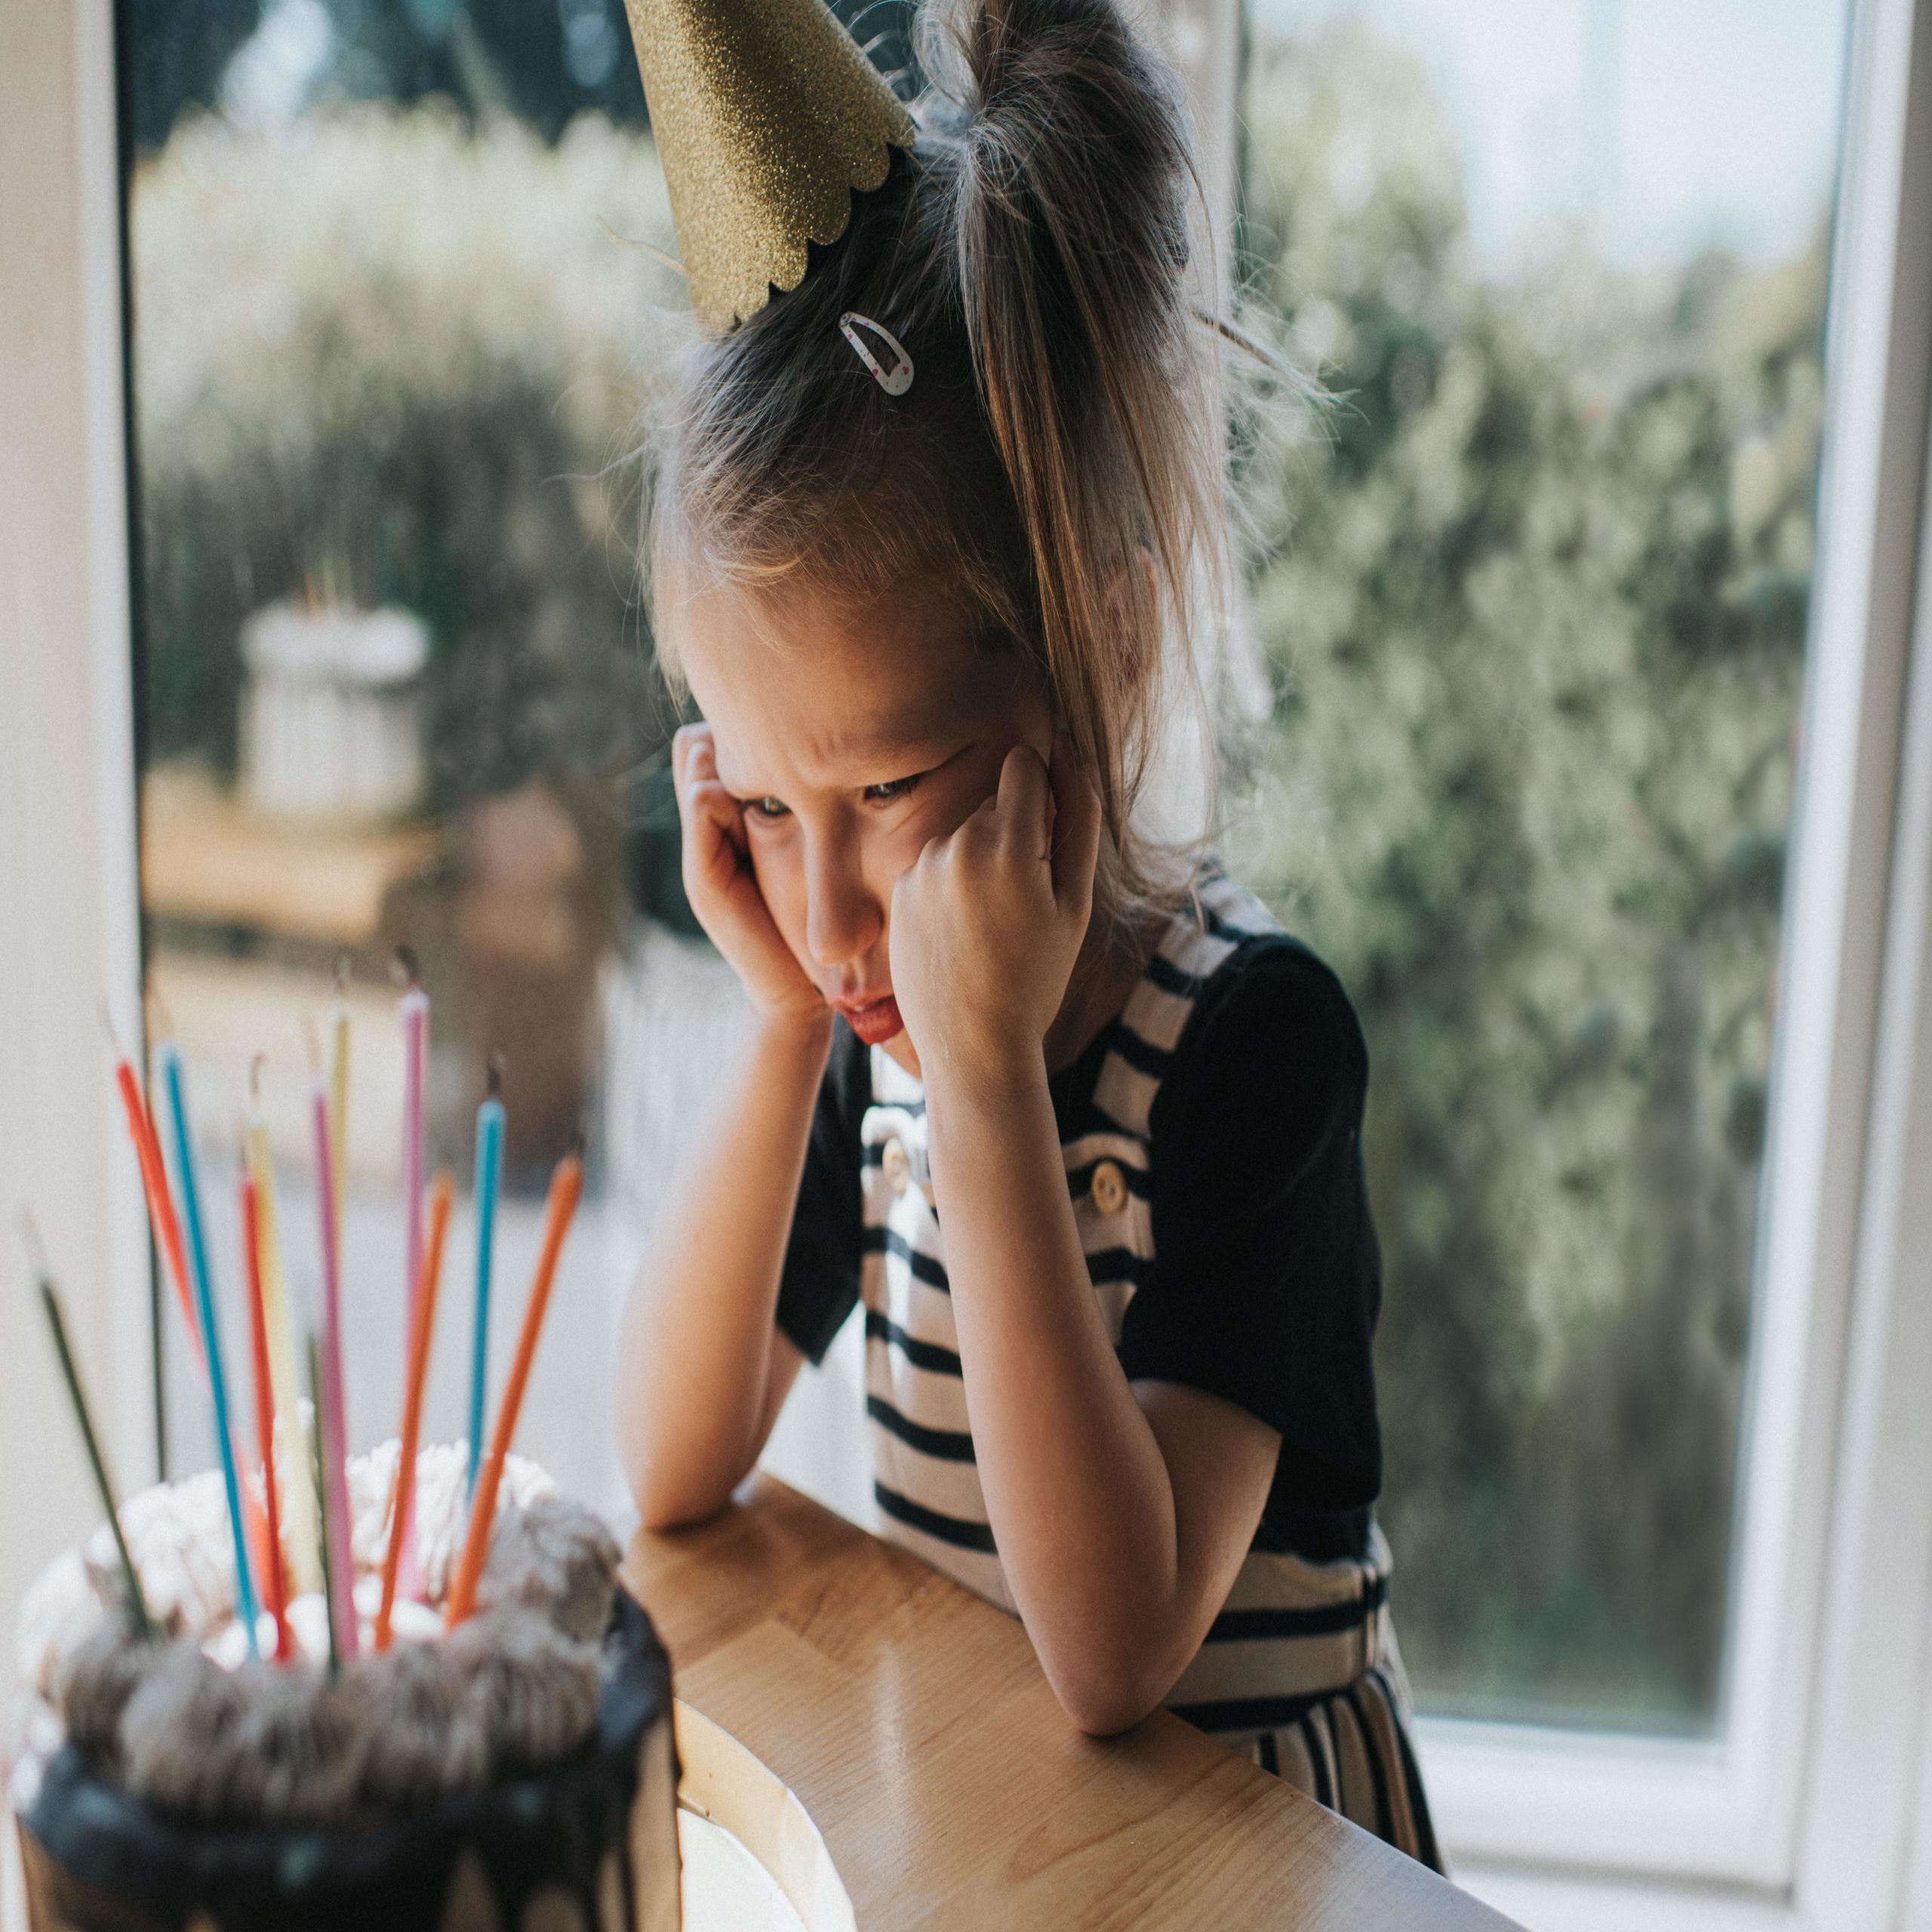 birthday spankings: young girl sad at her birthday party in front of cake